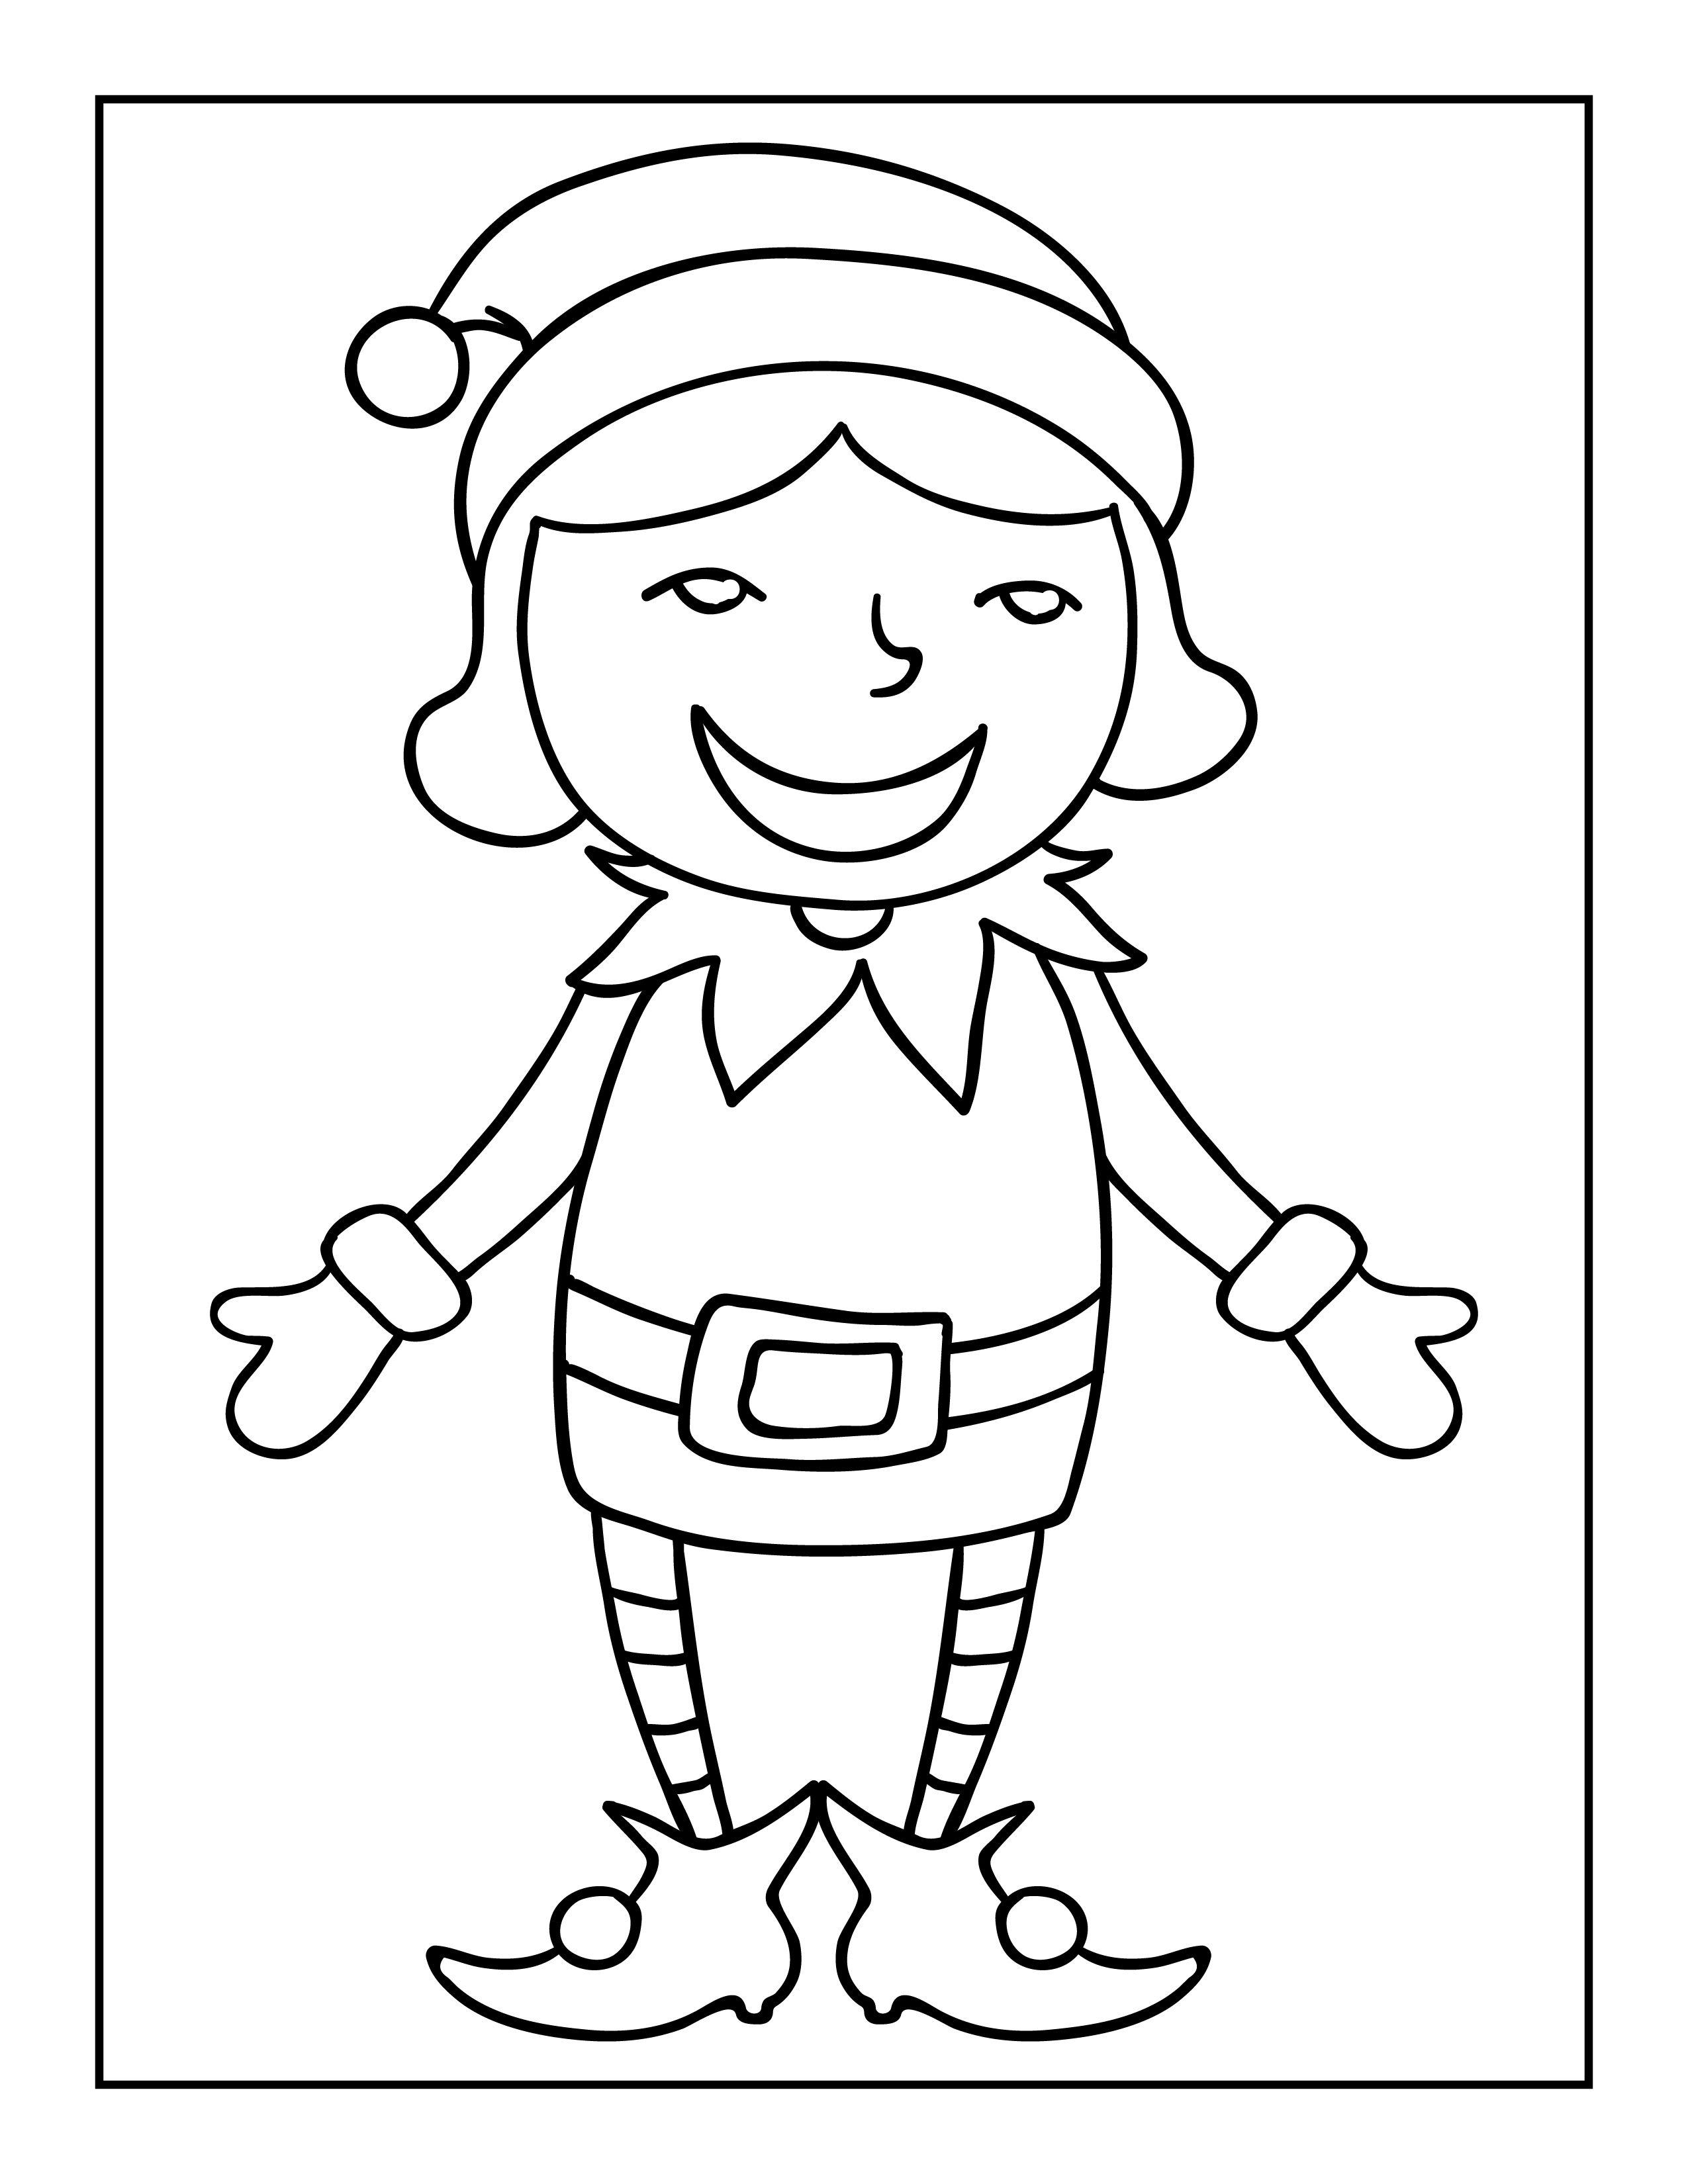 20 Elf Coloring Pages, Christmas Elves: North Pole Christmas